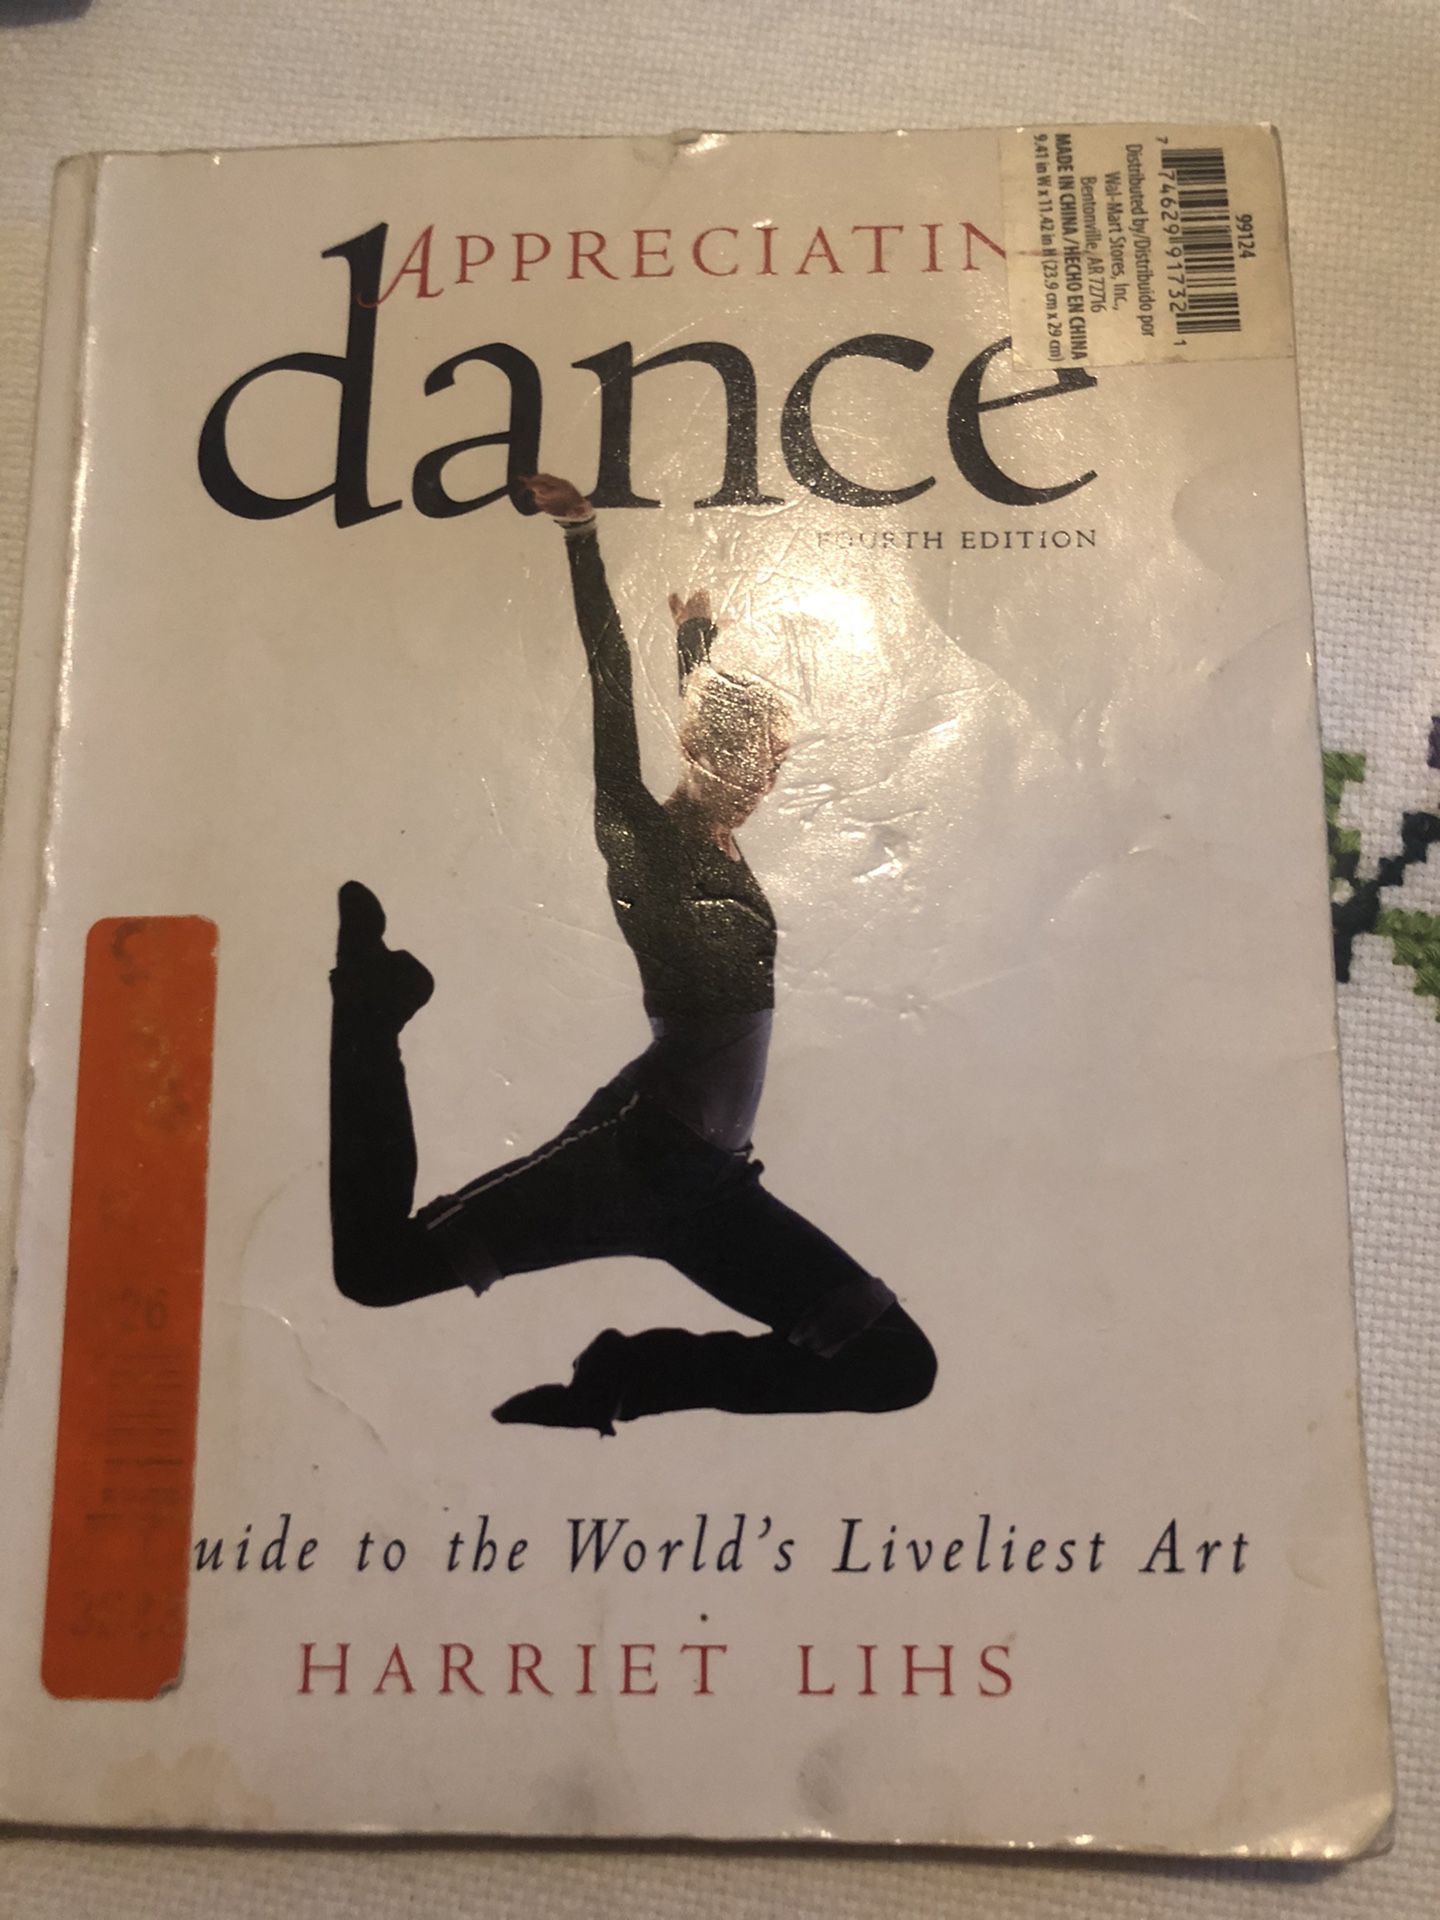 Appreciating dance Fourth Edition by Harriet Lihs